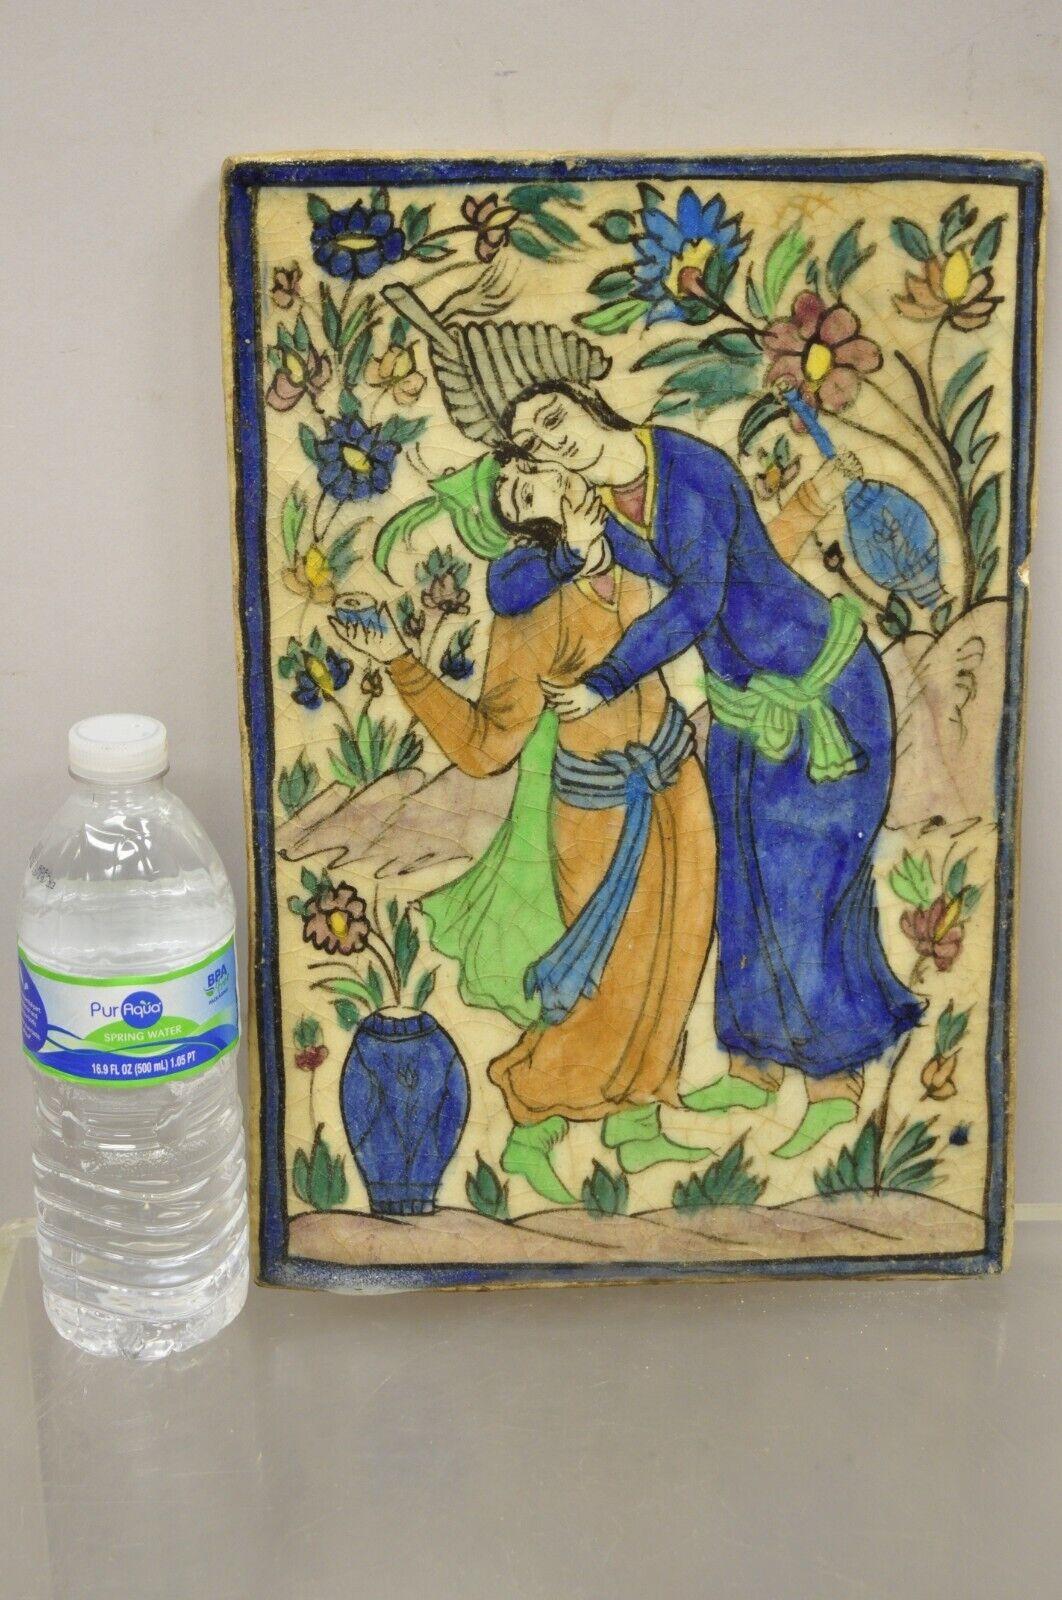 Antique Persian Iznik Qajar Style Ceramic Pottery Tile Man and Woman Courting C1. Original crackle glazed finish, heavy ceramic pottery construction, very impressive detail, wonderful style and form. Great to mount as wall art or accent tiles for